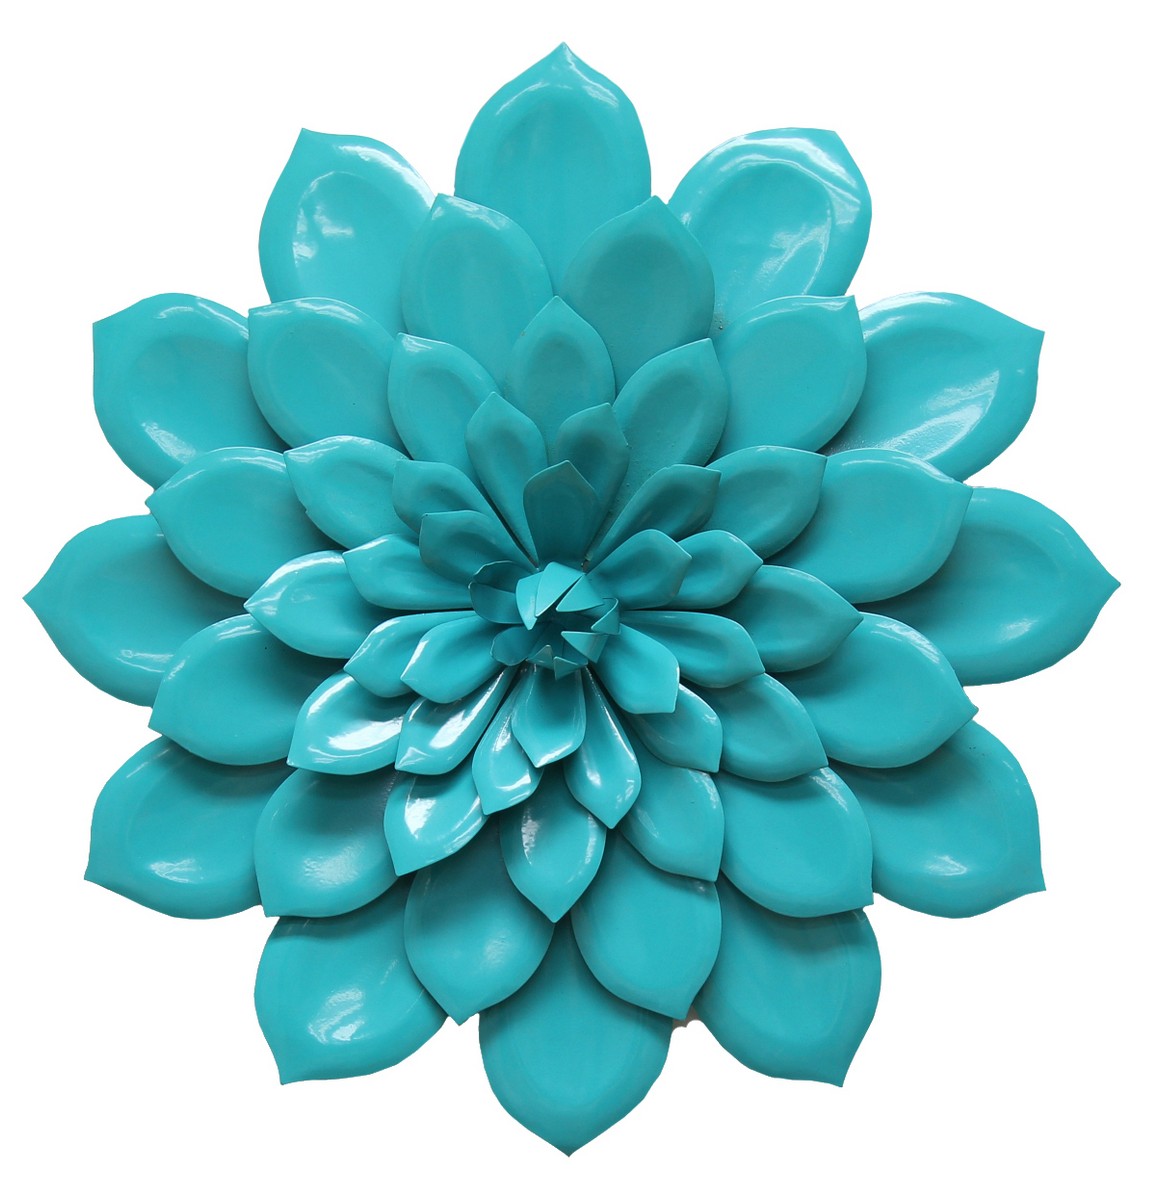 Stratton Home Decor Layered Flower Wall Decor - Teal